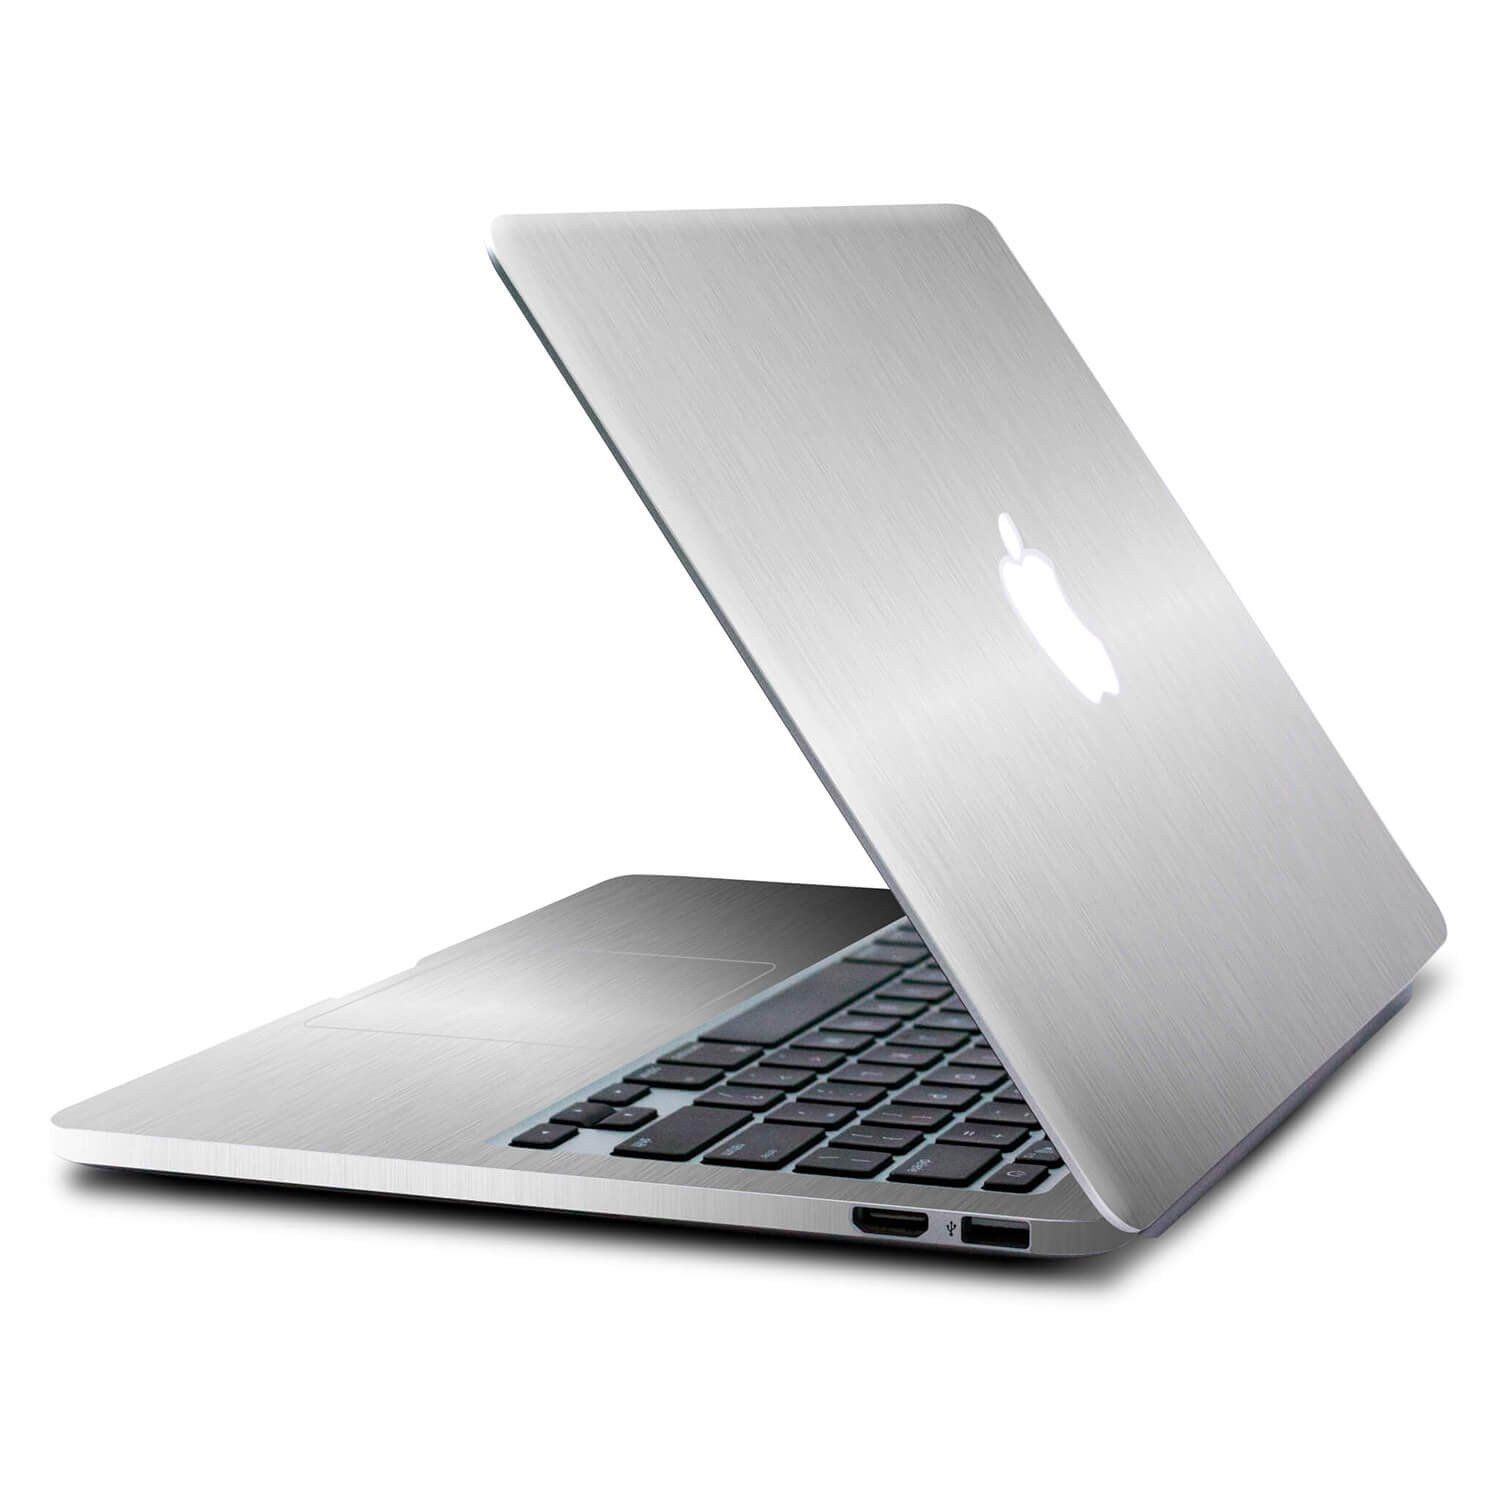 Sell your used Apple Macbooks